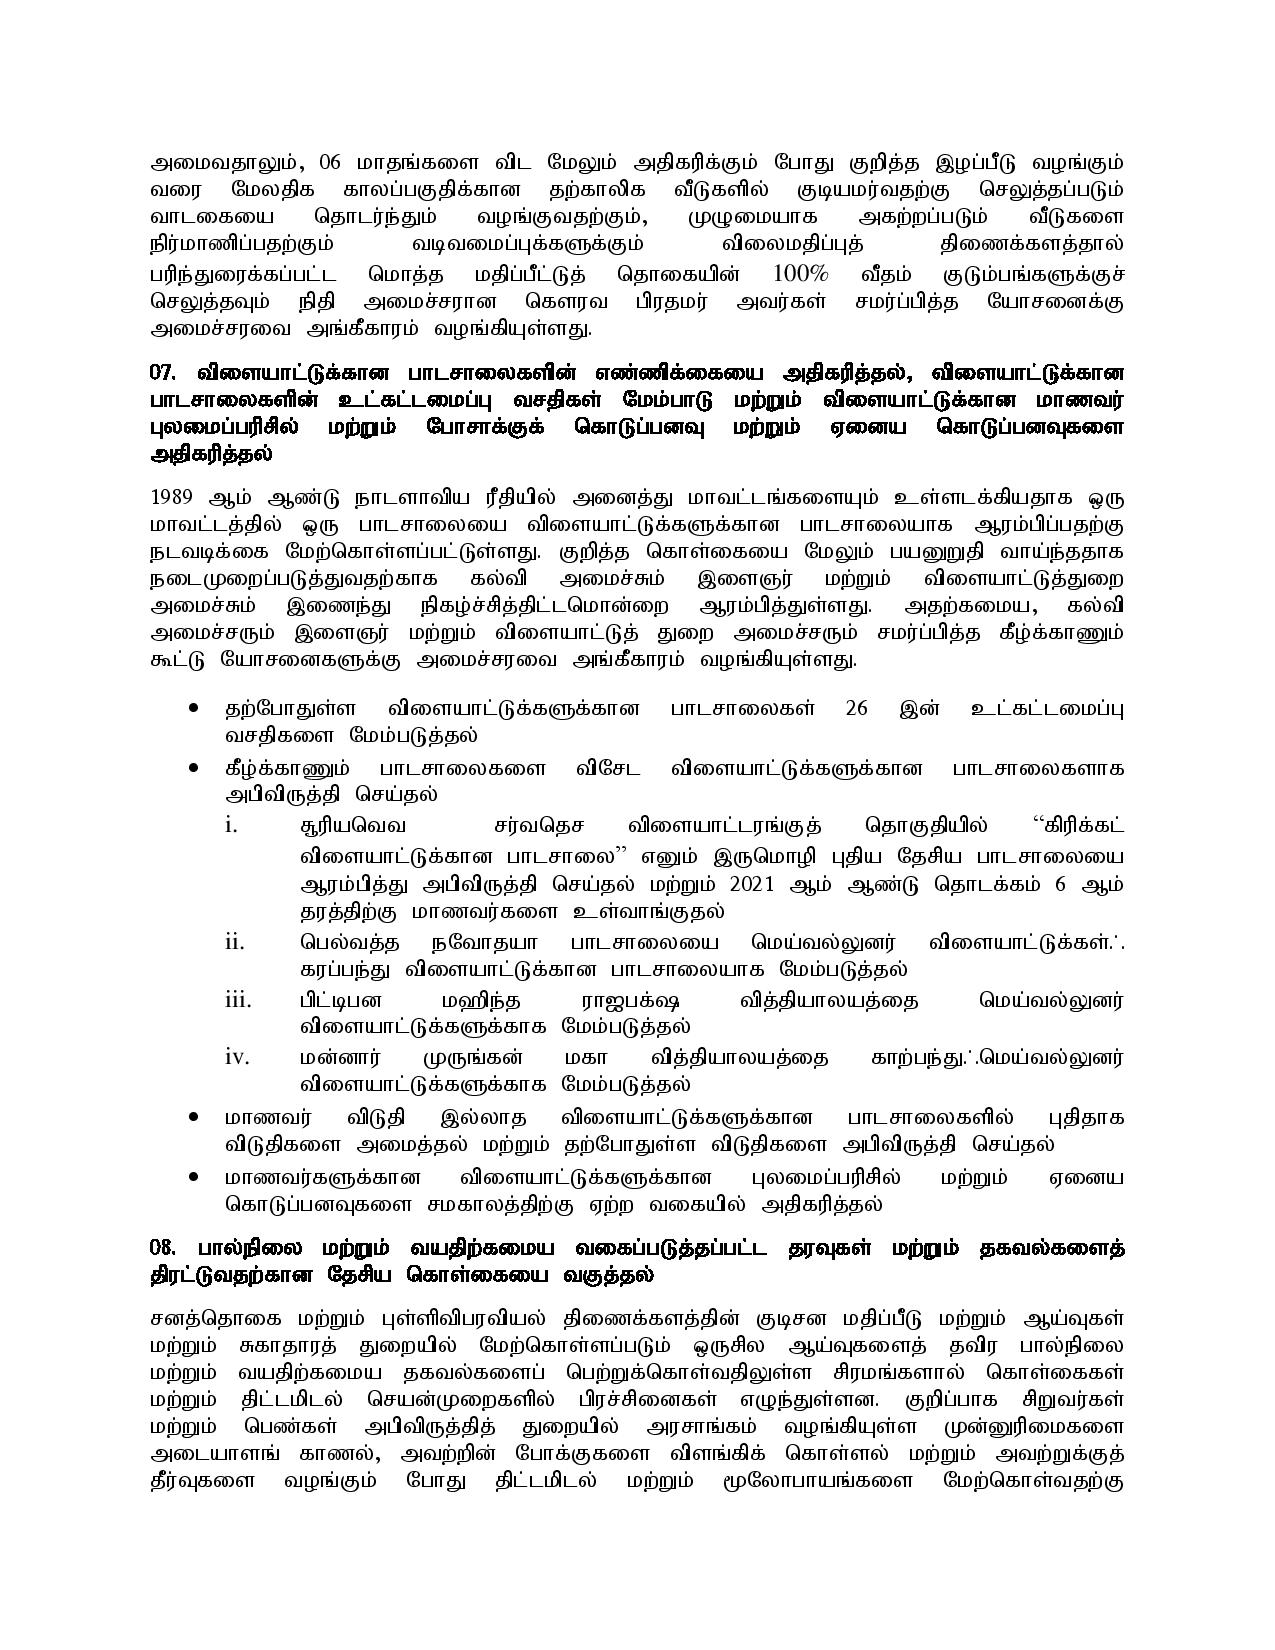 Tamil 1 page 003